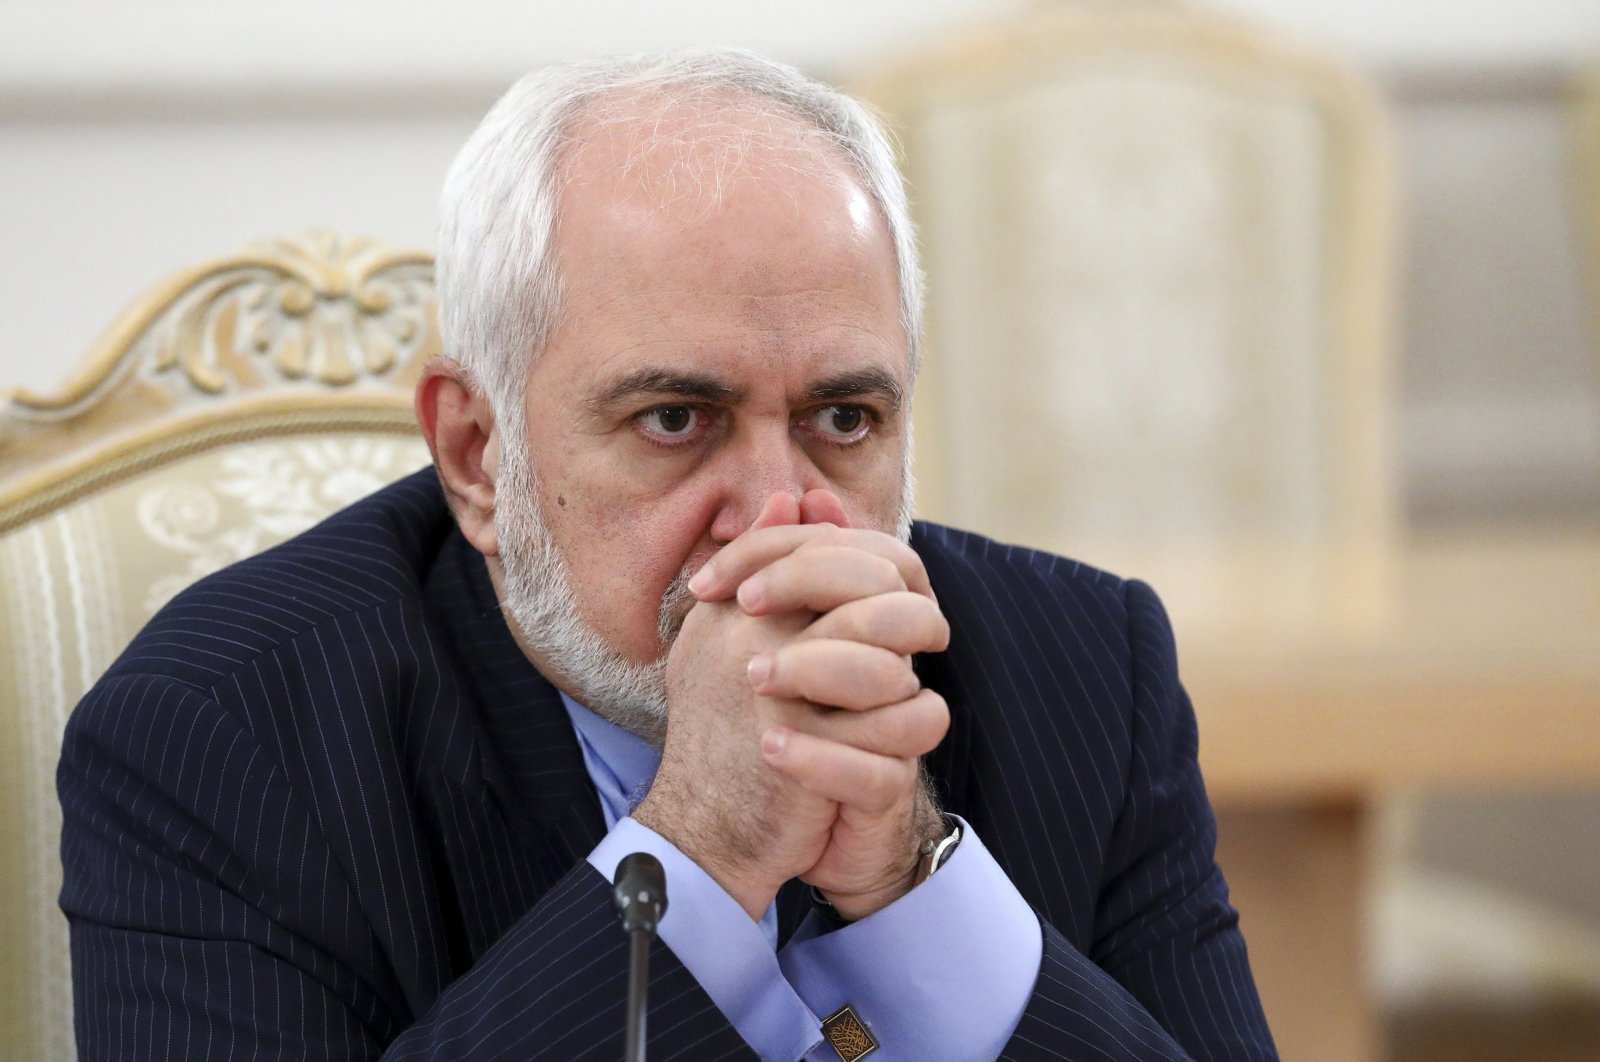 Iranian Foreign Minister Mohammad Javad Zarif listens during talks in Moscow, Russia, Jan. 26, 2021. (Russian Foreign Ministry Press Service via AP)